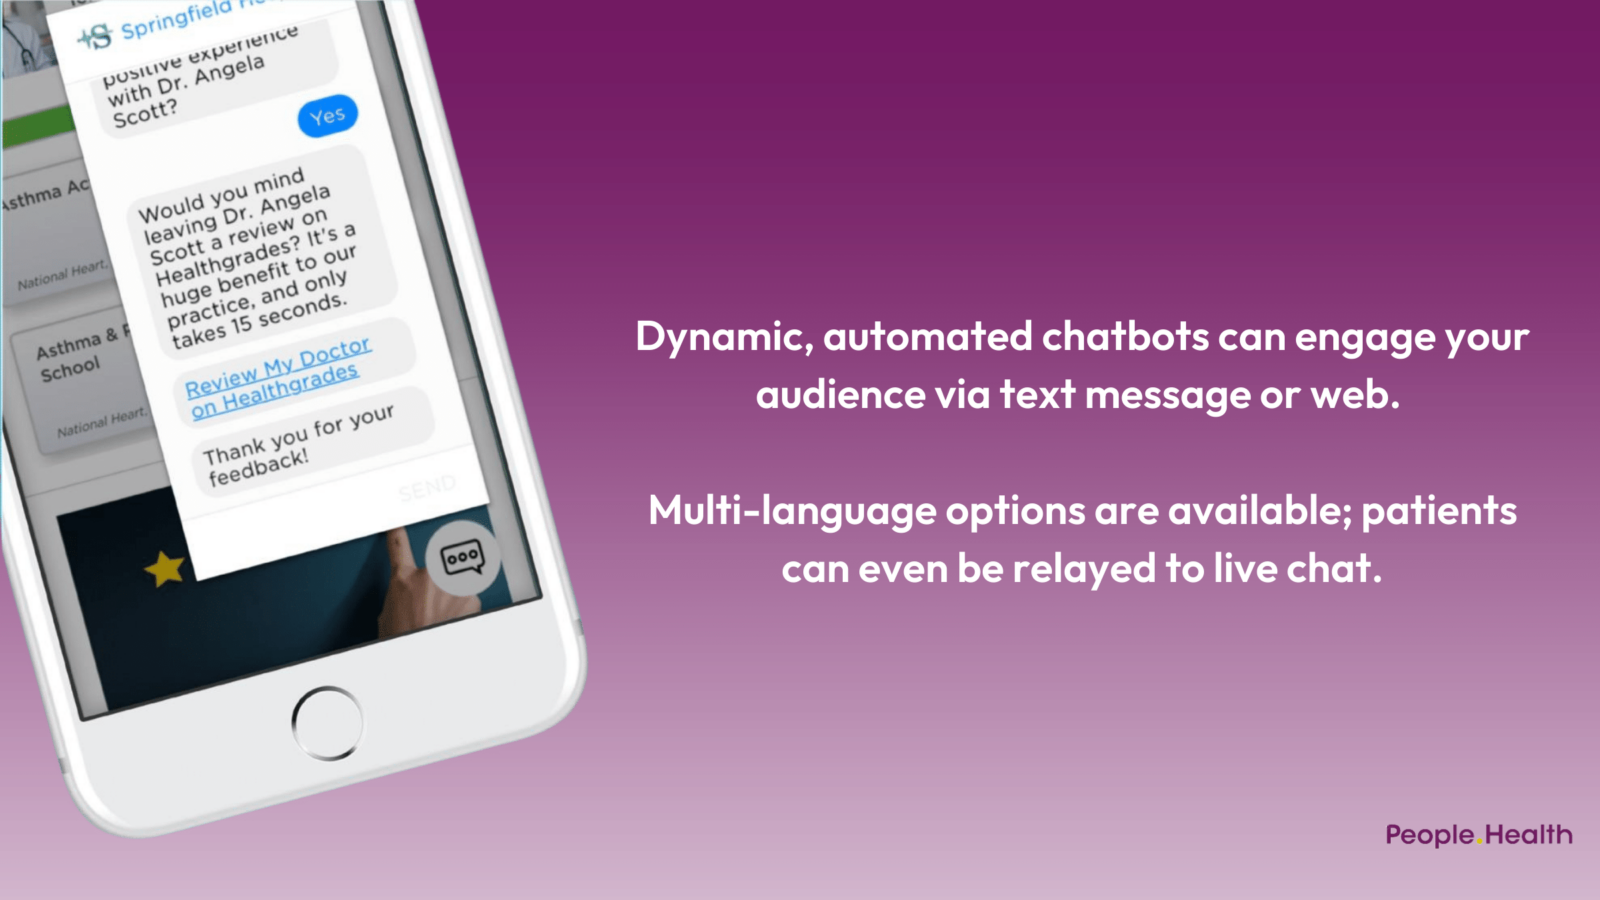 Dynamic, automated chatbots can engage your audience via text message or web. Multi-language options are available; patients can even be relayed to live chat.